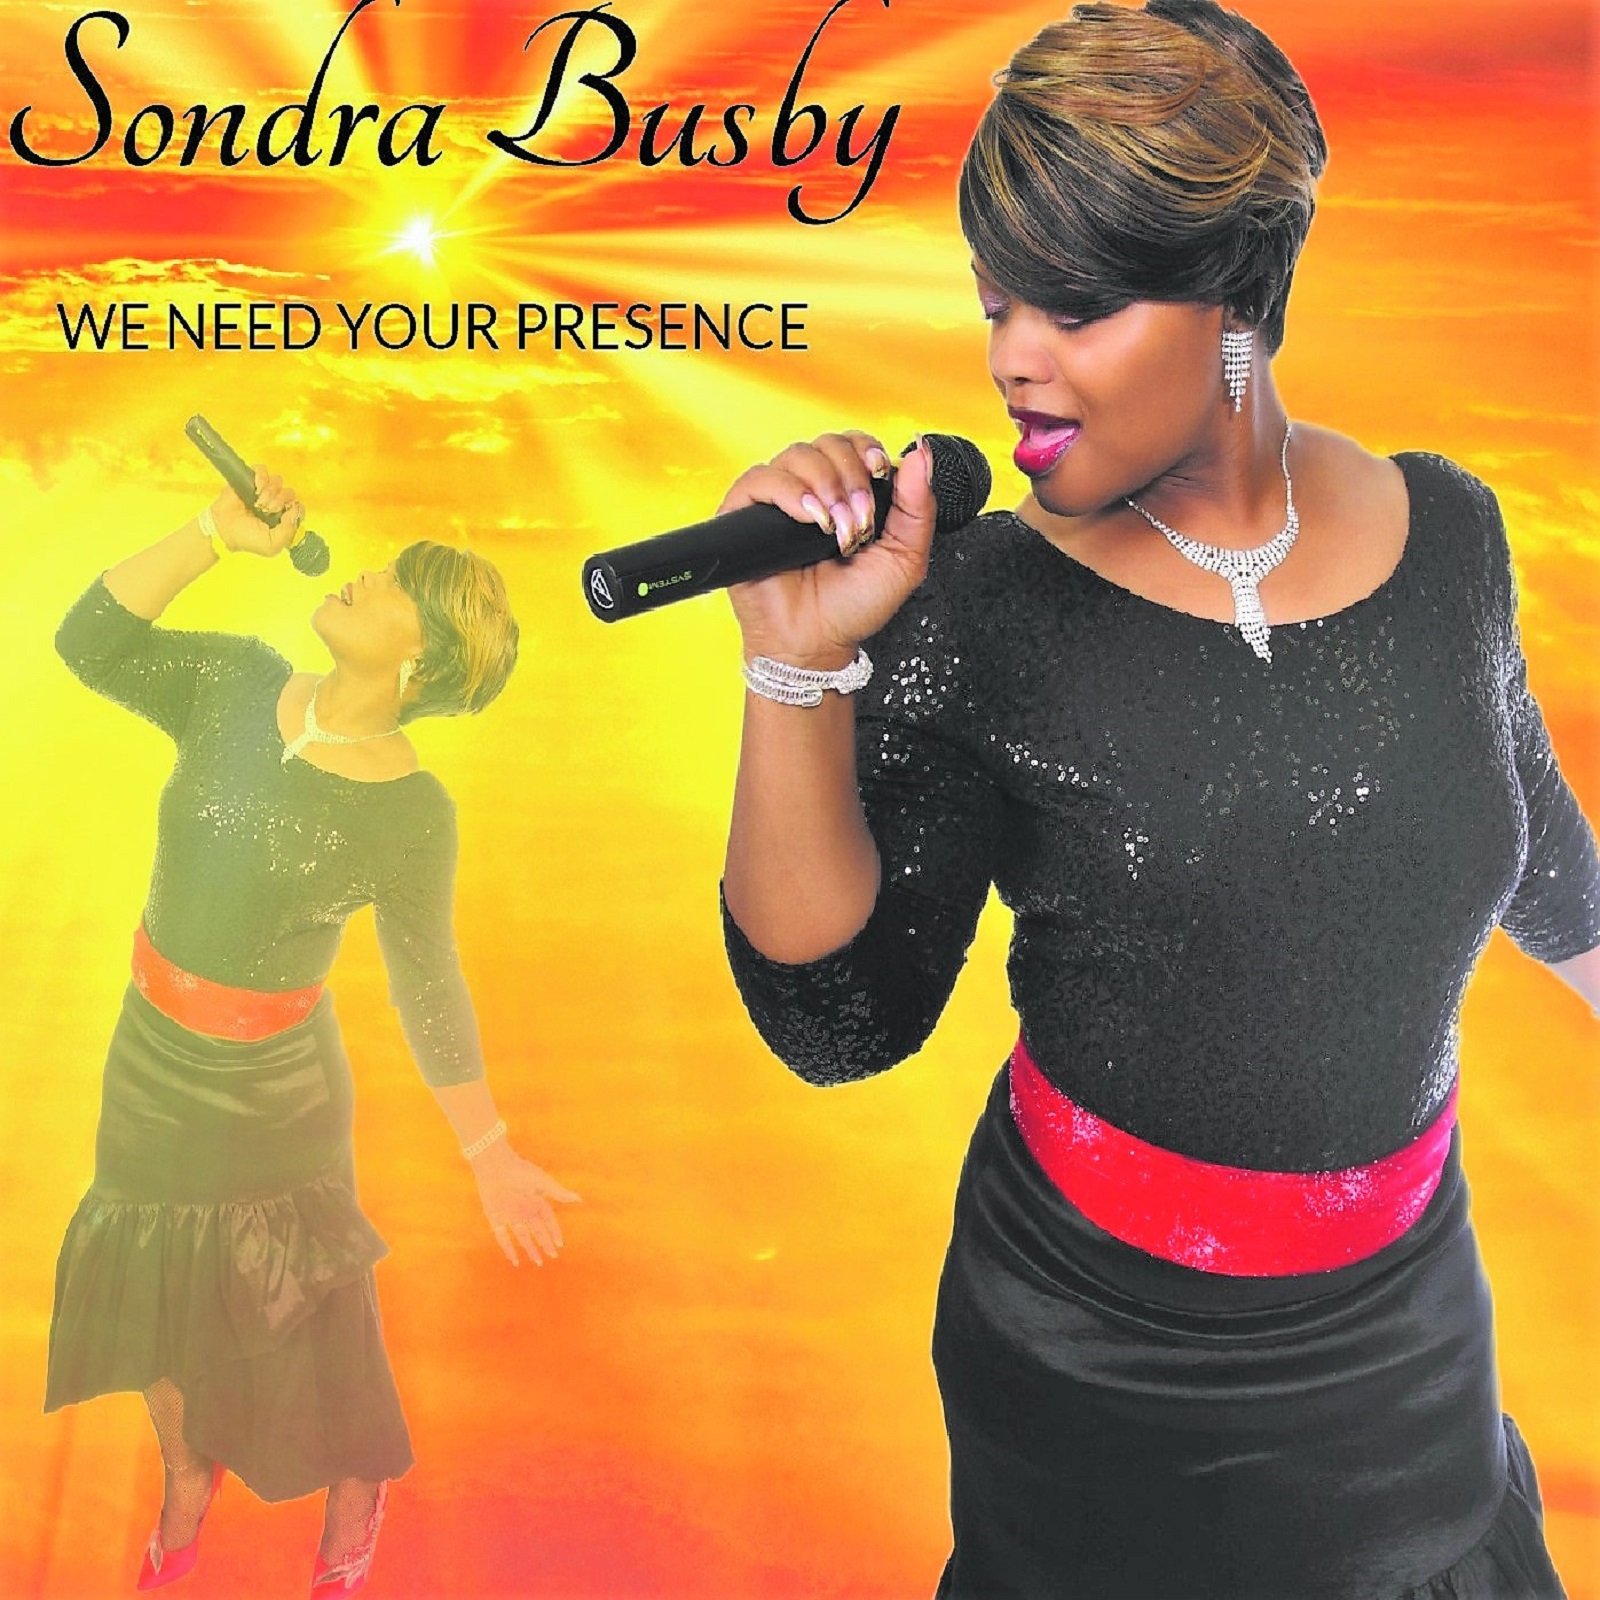 Art for You've Been Good To Me by Sondra Busby